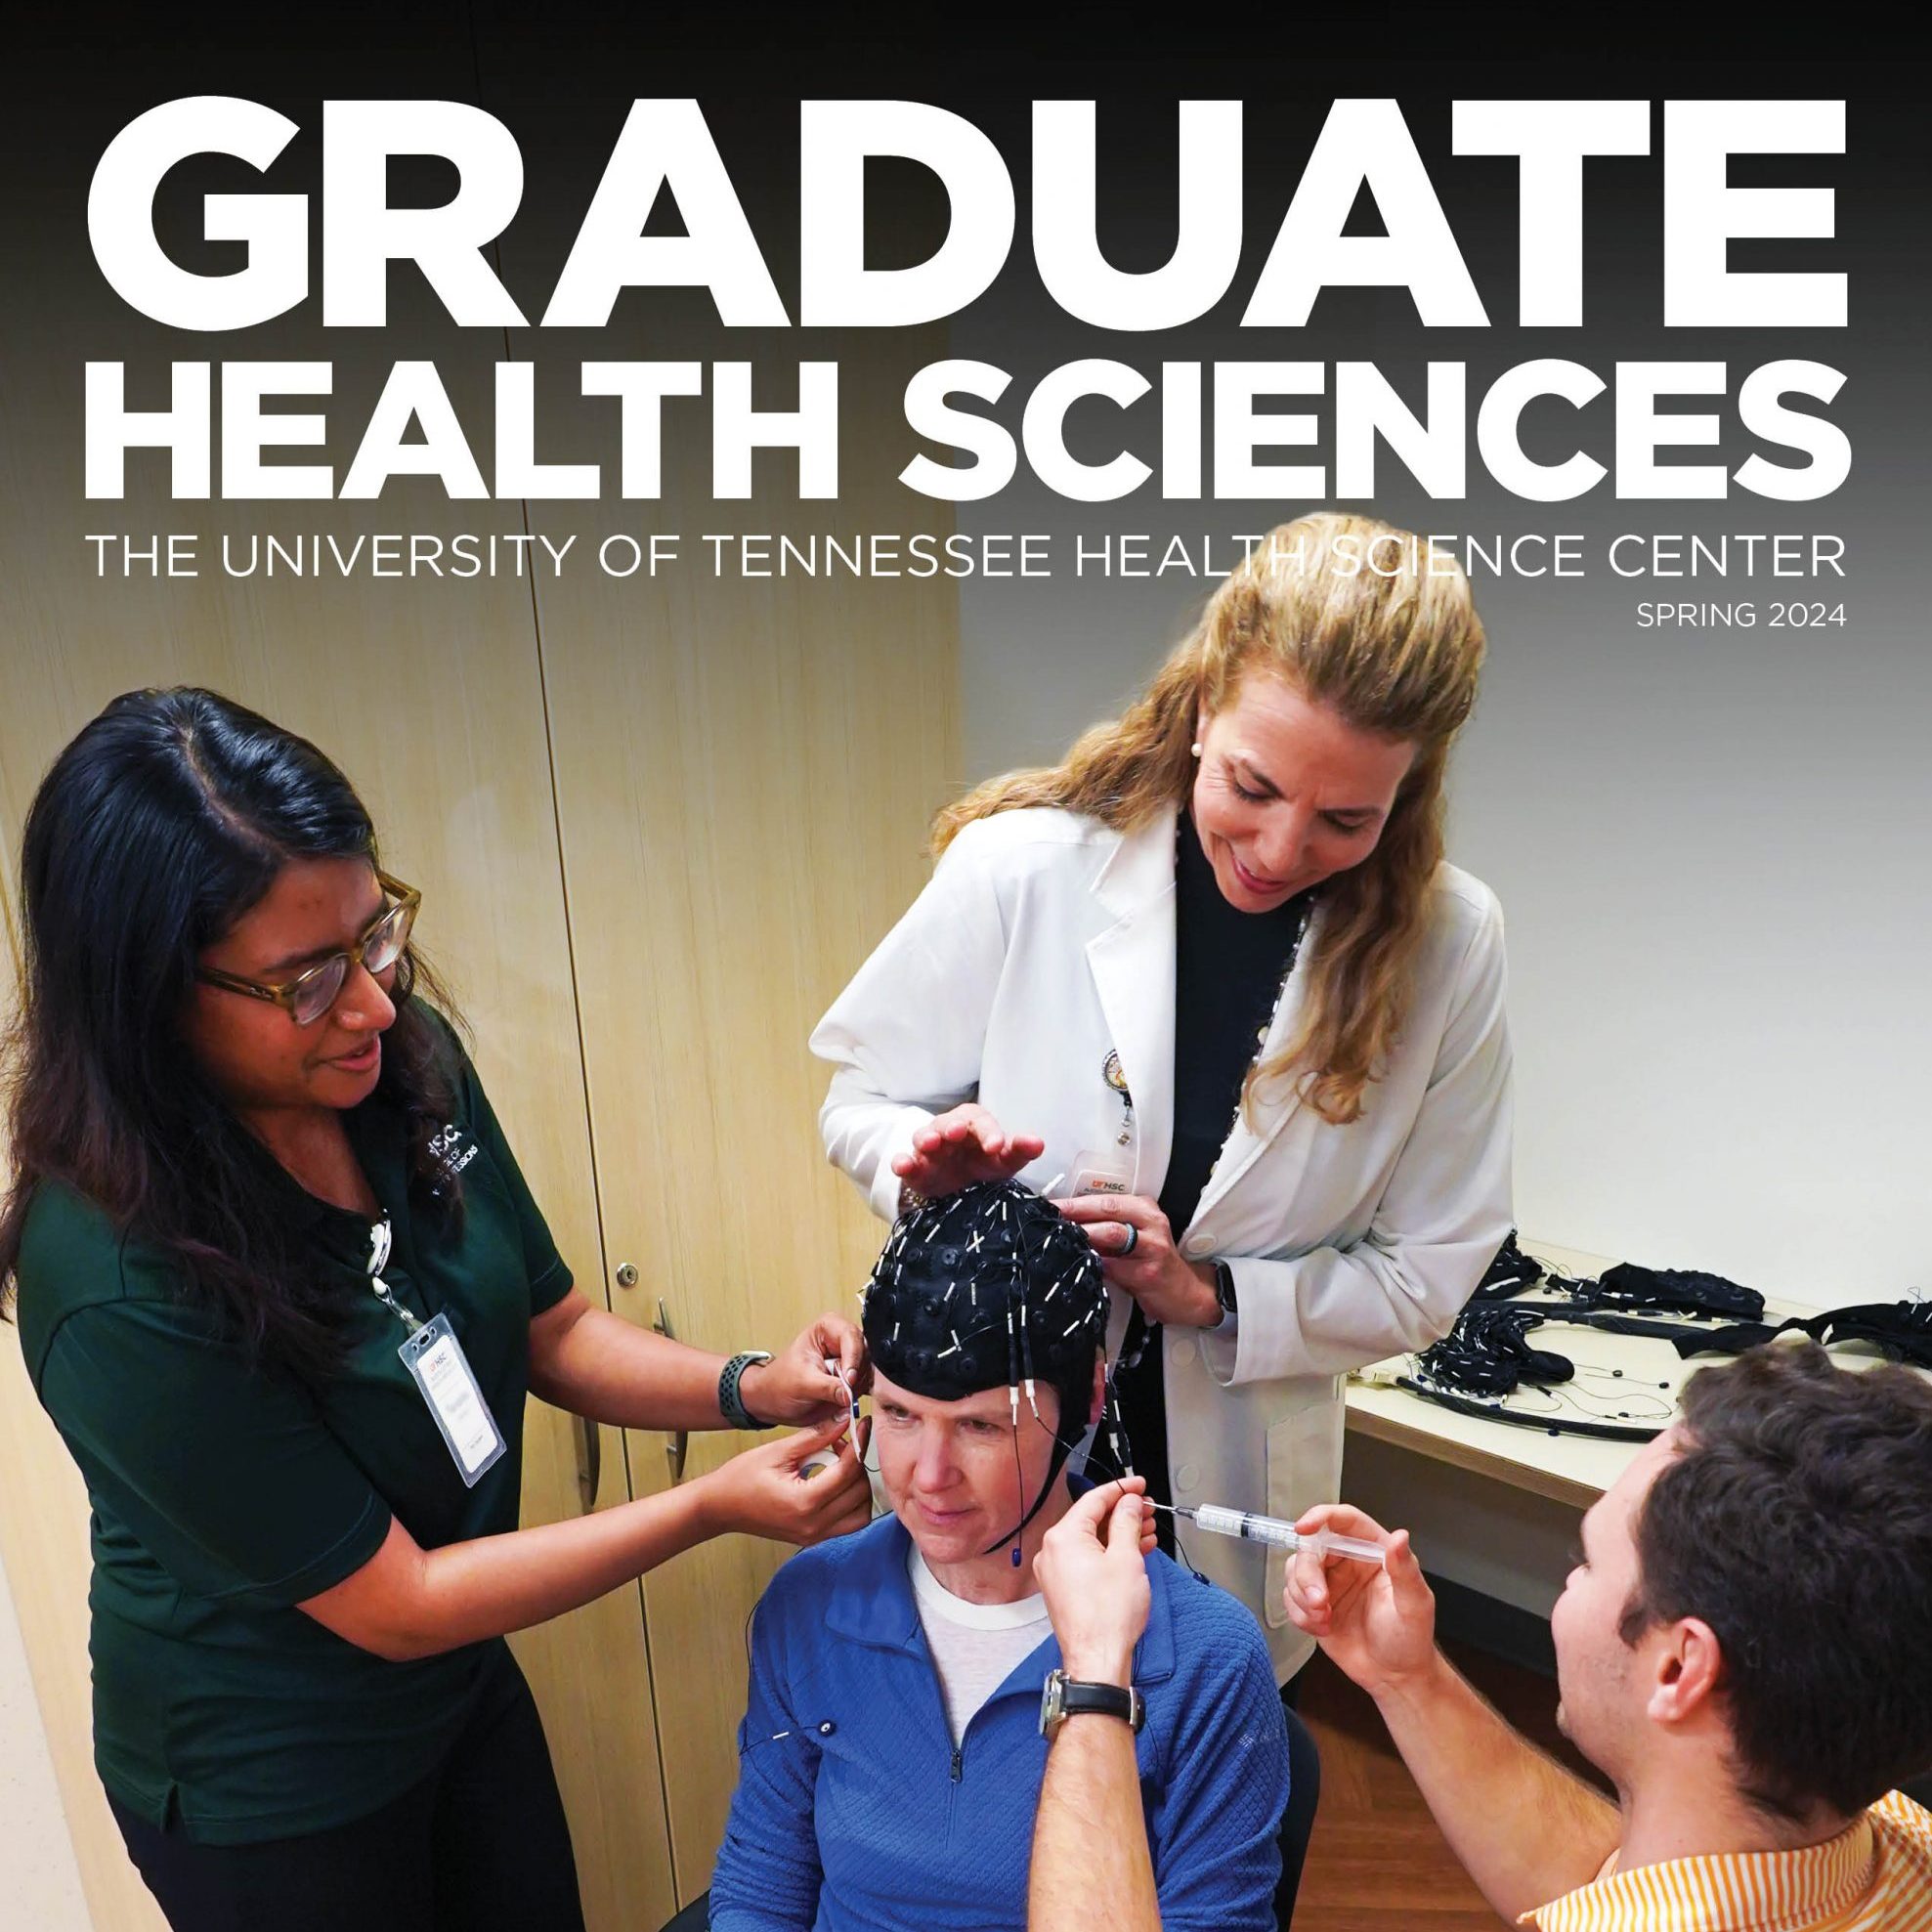 Graduate Health Sciences Magazine Highlights Students and Researchers’ Impactful Work